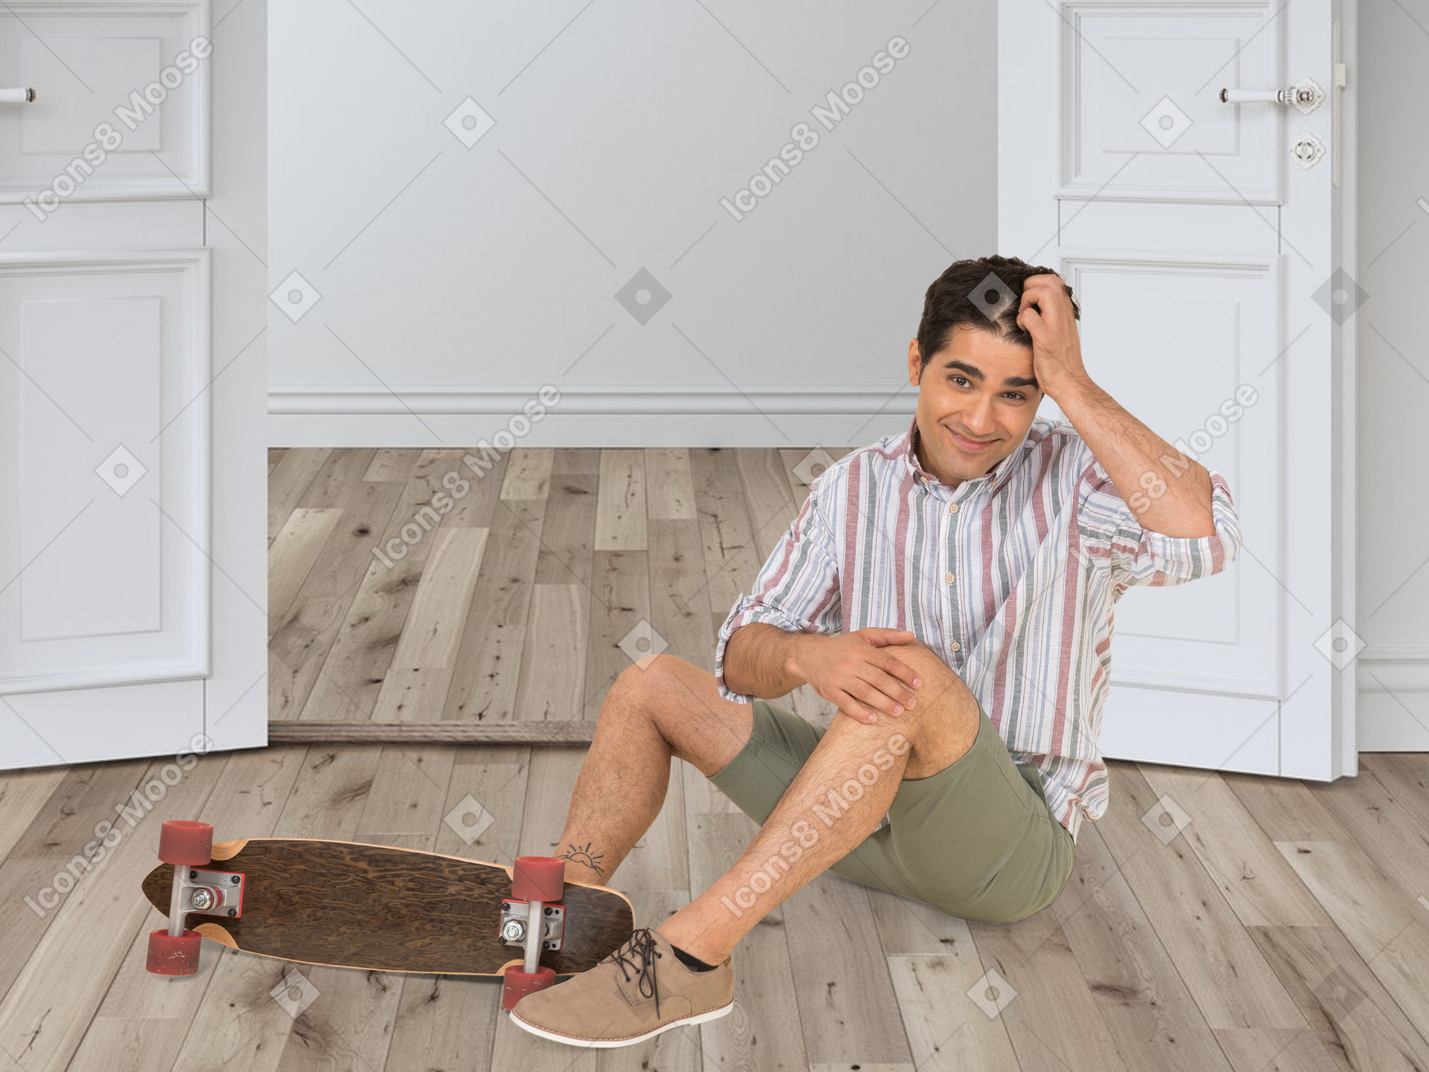 Man playing with a vacuum cleaner